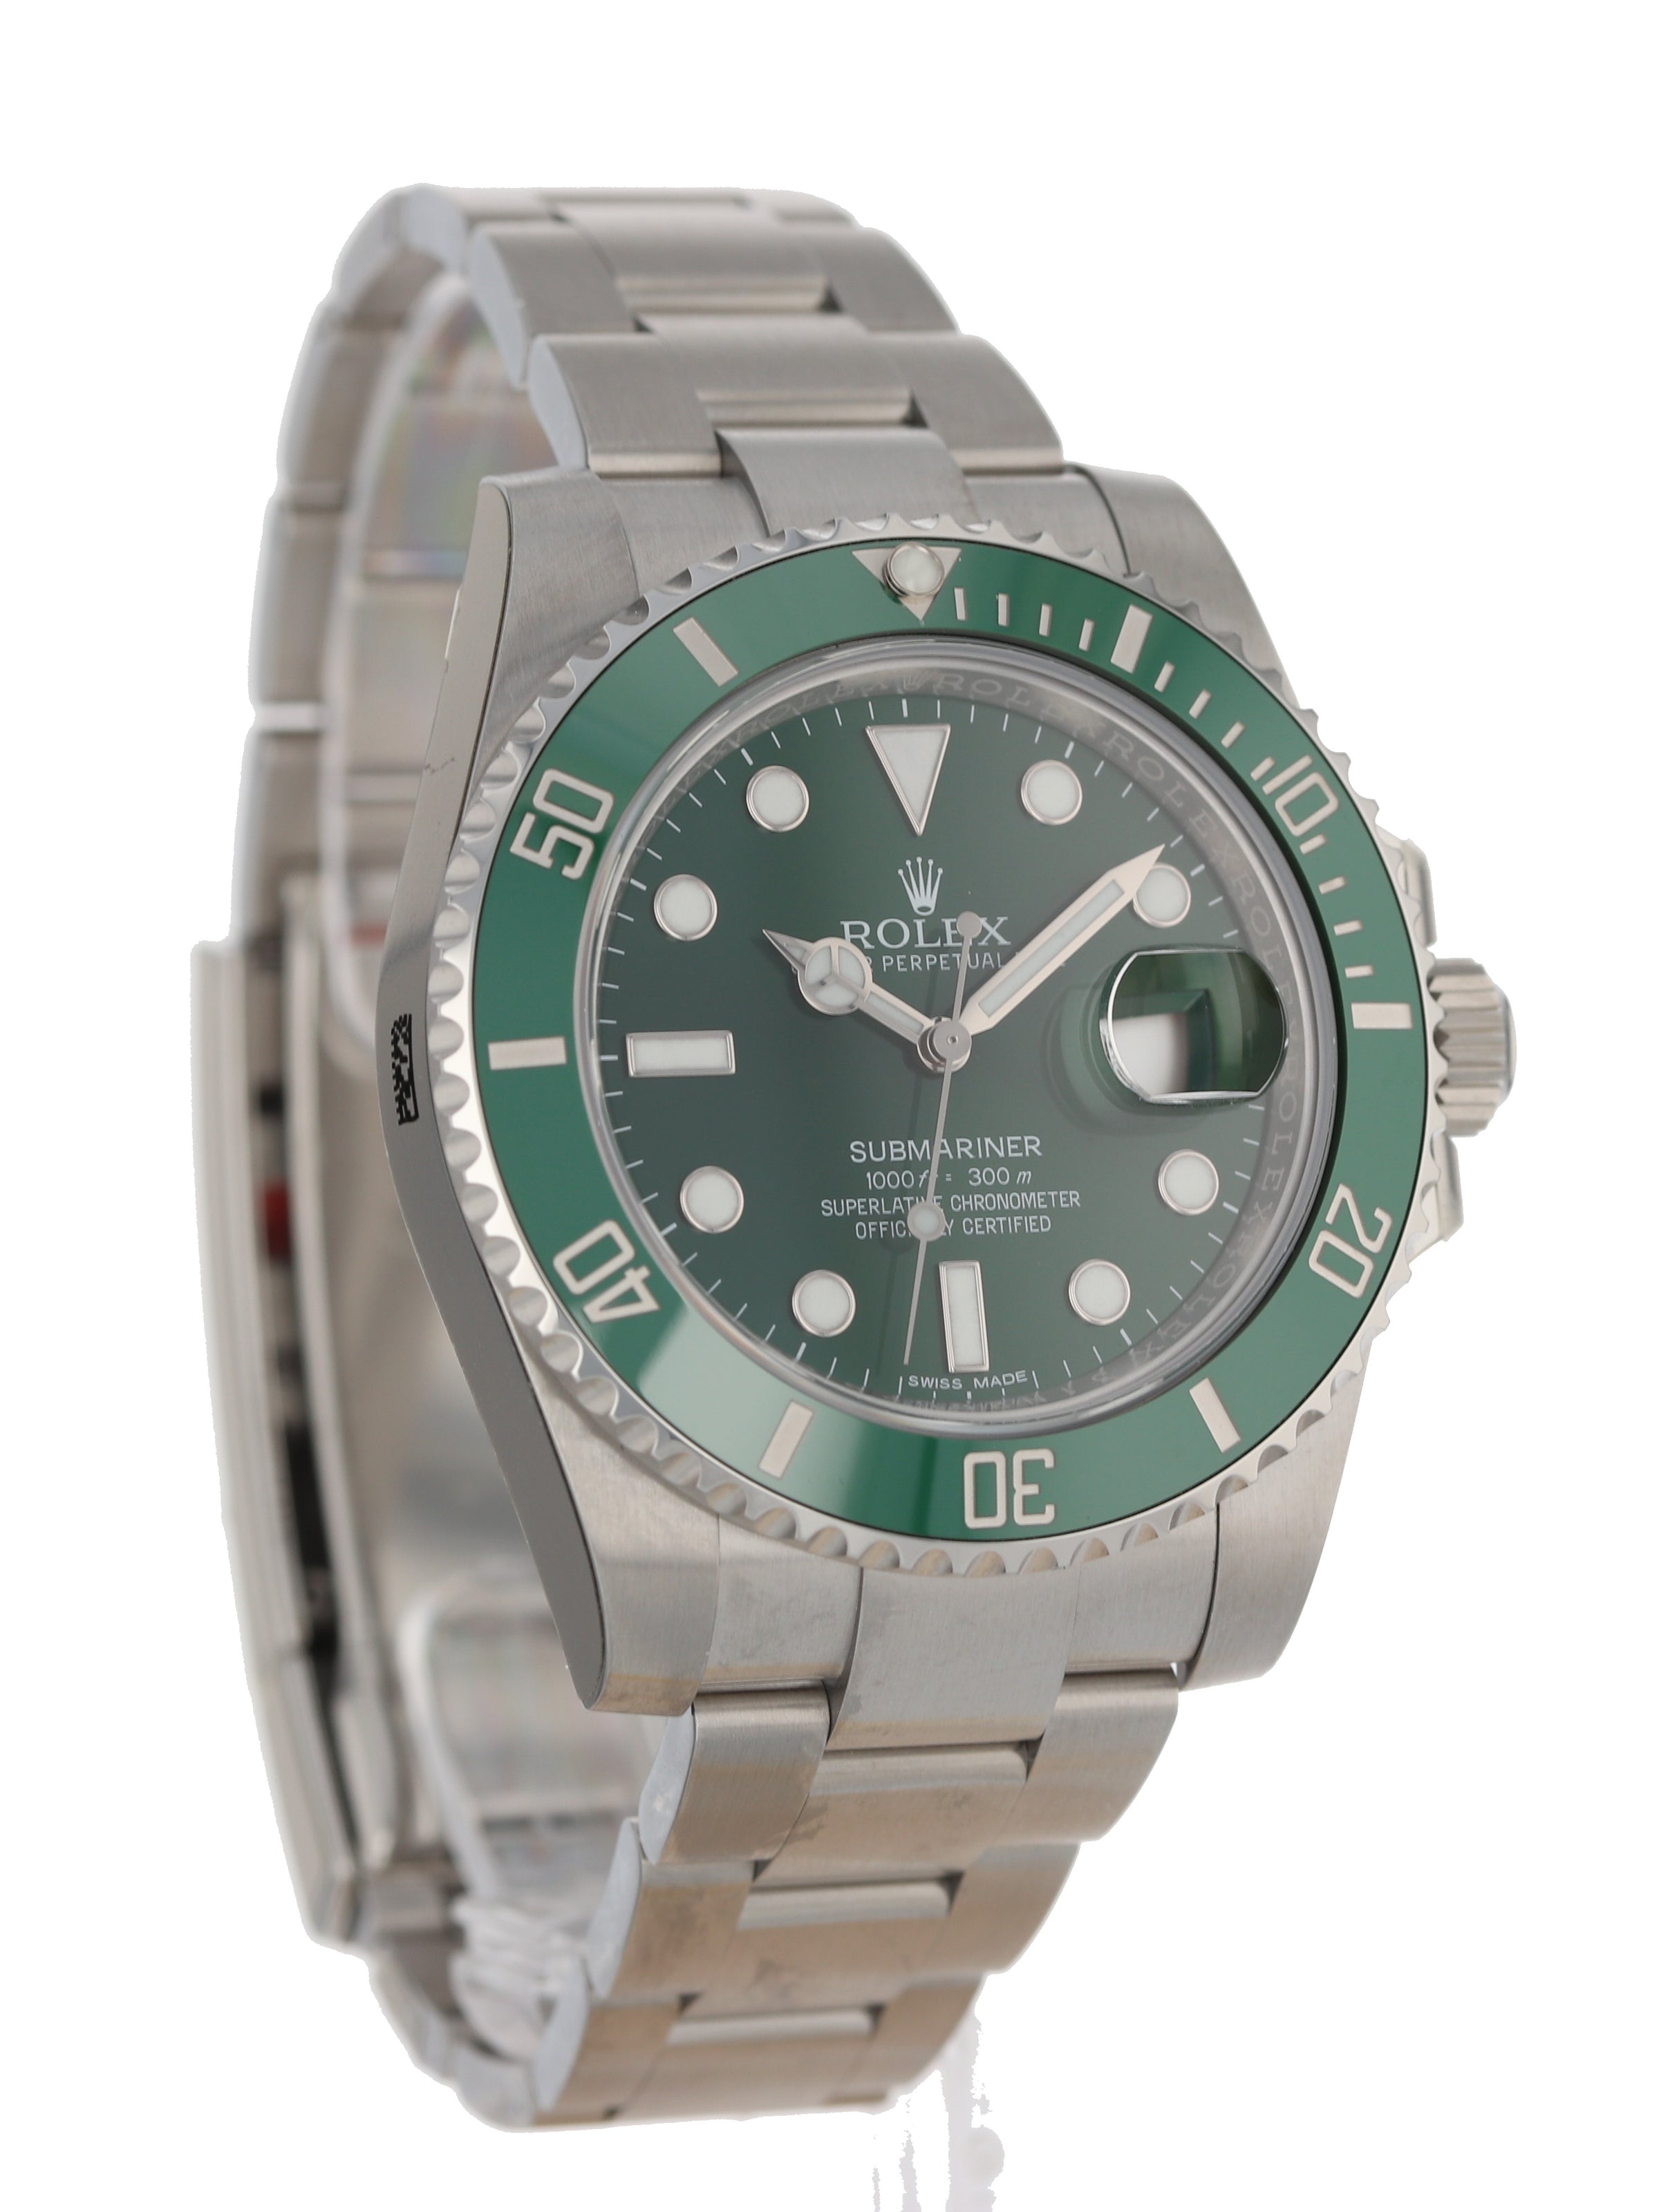 Buy Rolex Submariner Date Hulk 116610LV Stainless Steel by Twain Time Inc.